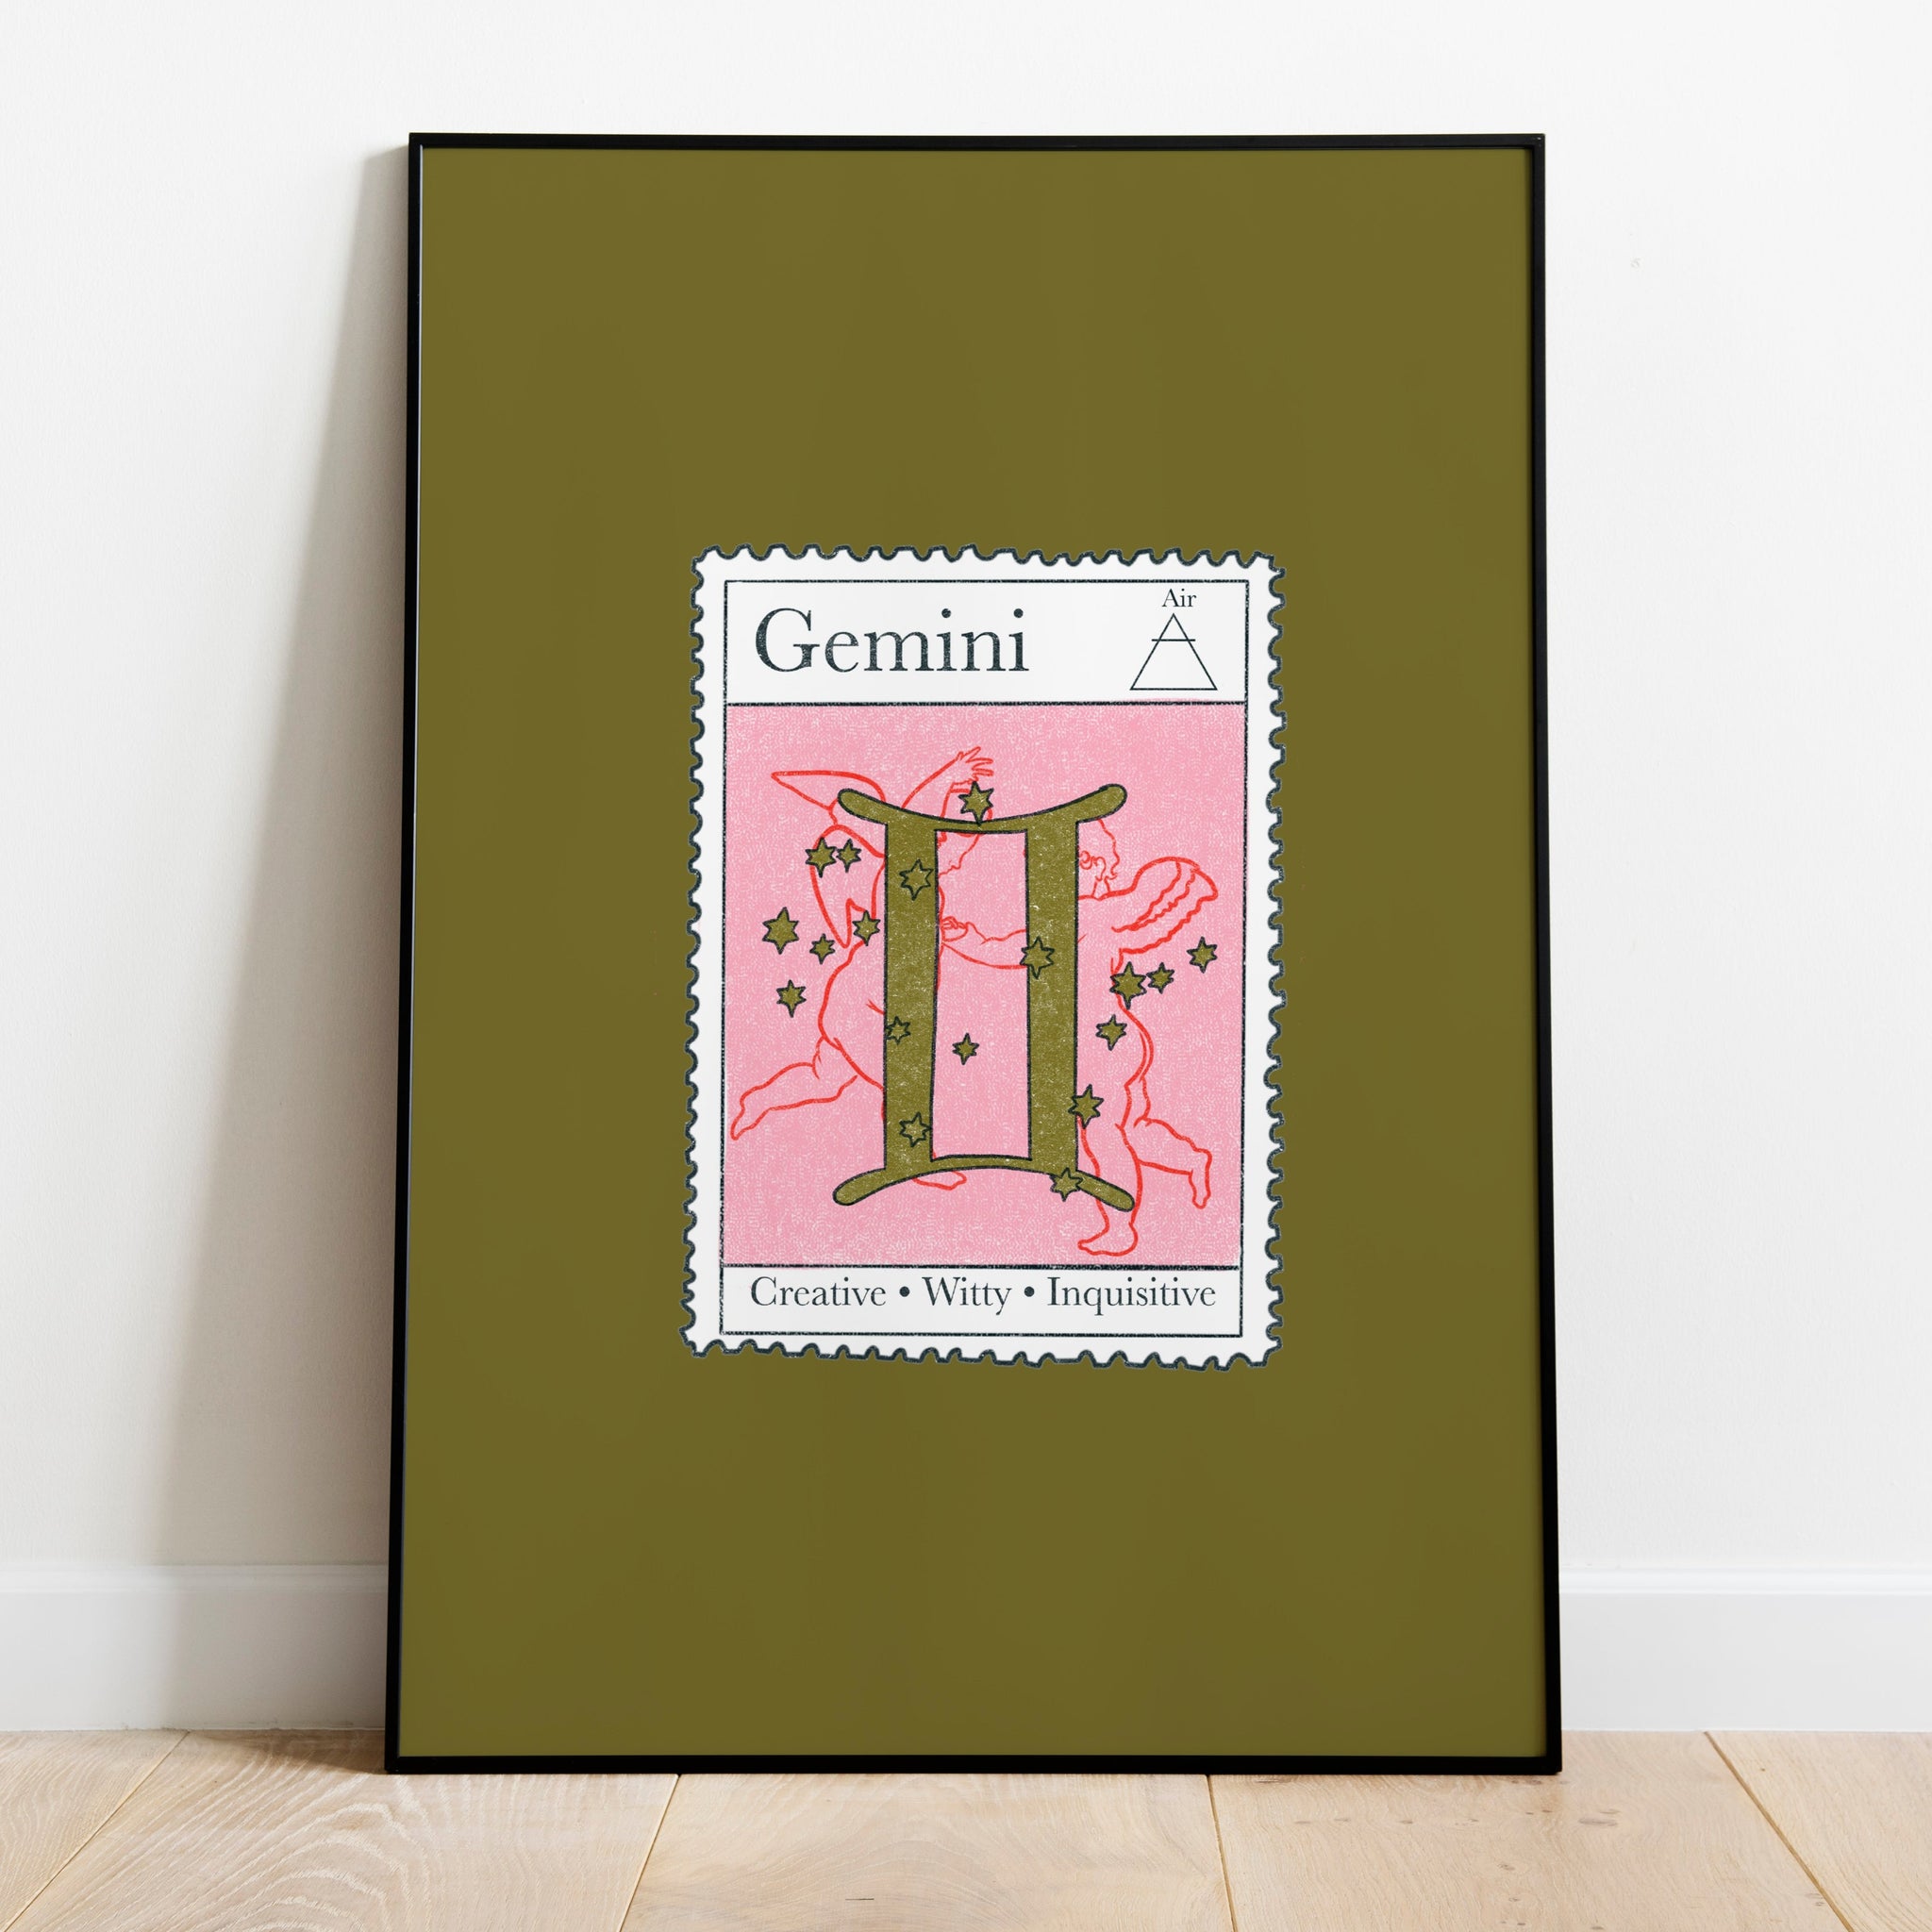 mage of a framed art print leaning against the wall. The art print itself is a postage stamp representing the star sign of gemini. The print is bright and colourful in shades of green, pink and red.